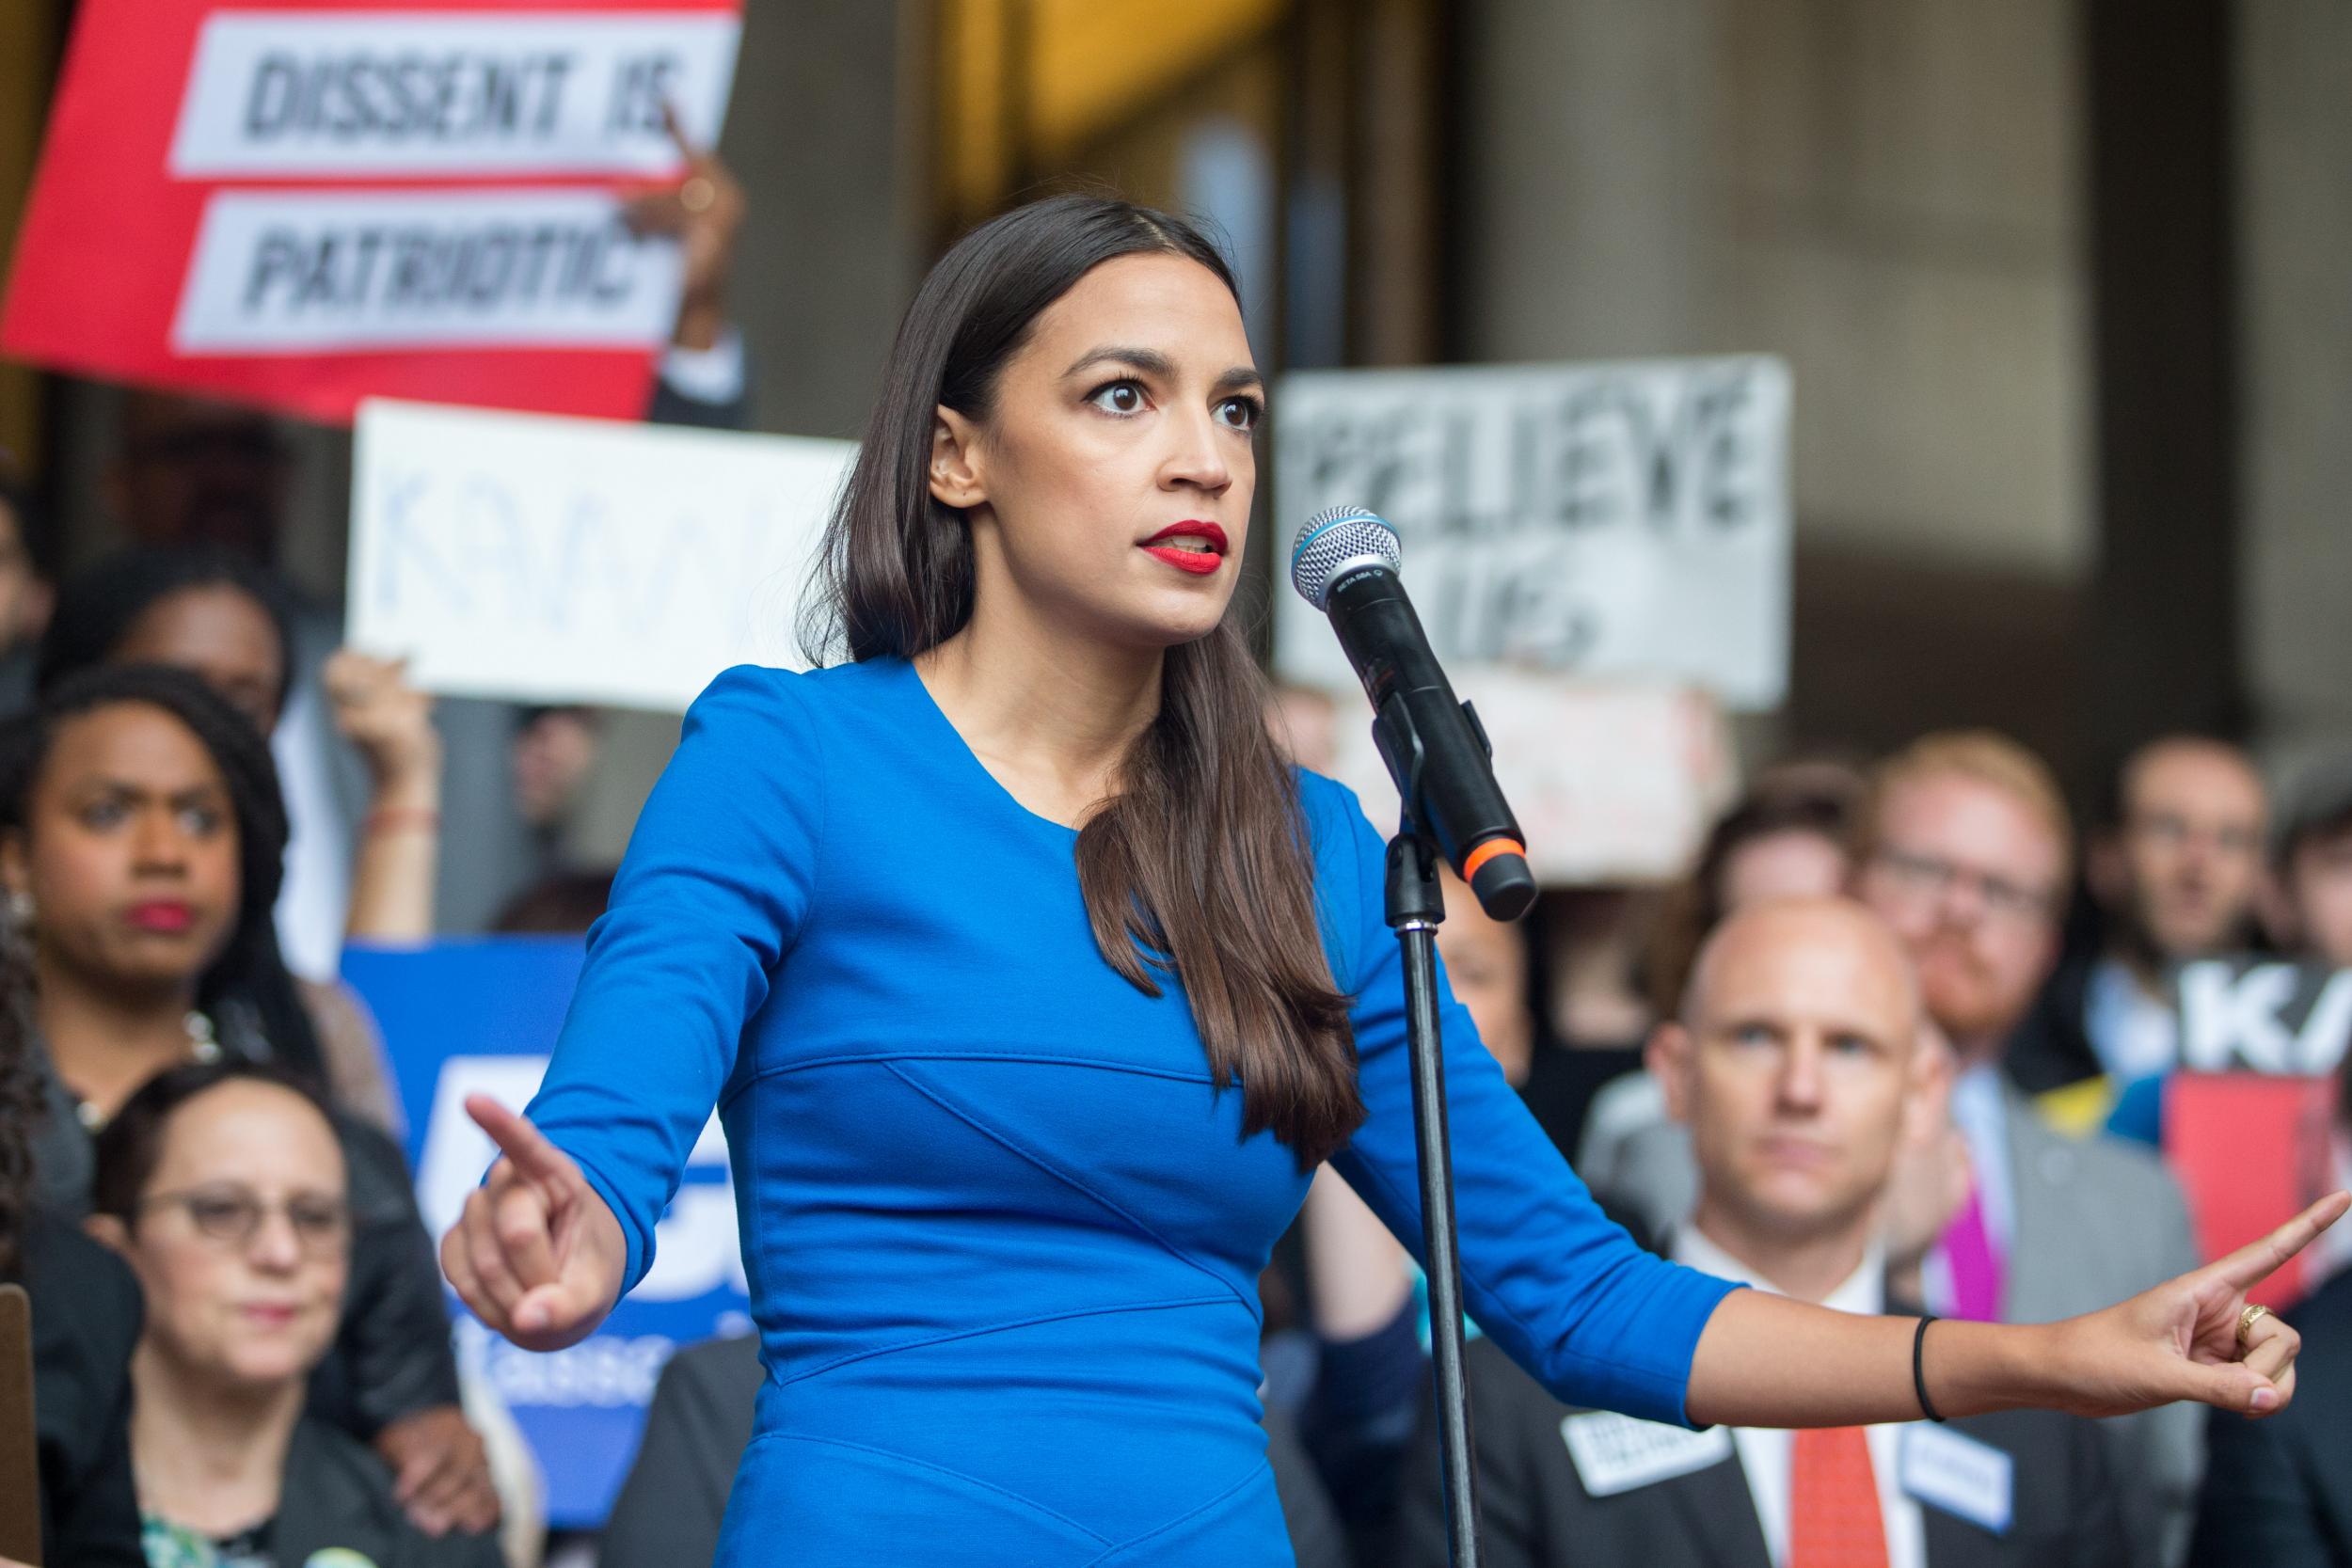 Alexandria Ocasio-Cortez speaks at a rally calling on Sen. Jeff Flake (R-AZ) to reject Judge Brett Kavanaugh's nomination to the Supreme Court on 1 October 2018 in Boston, Massachusetts